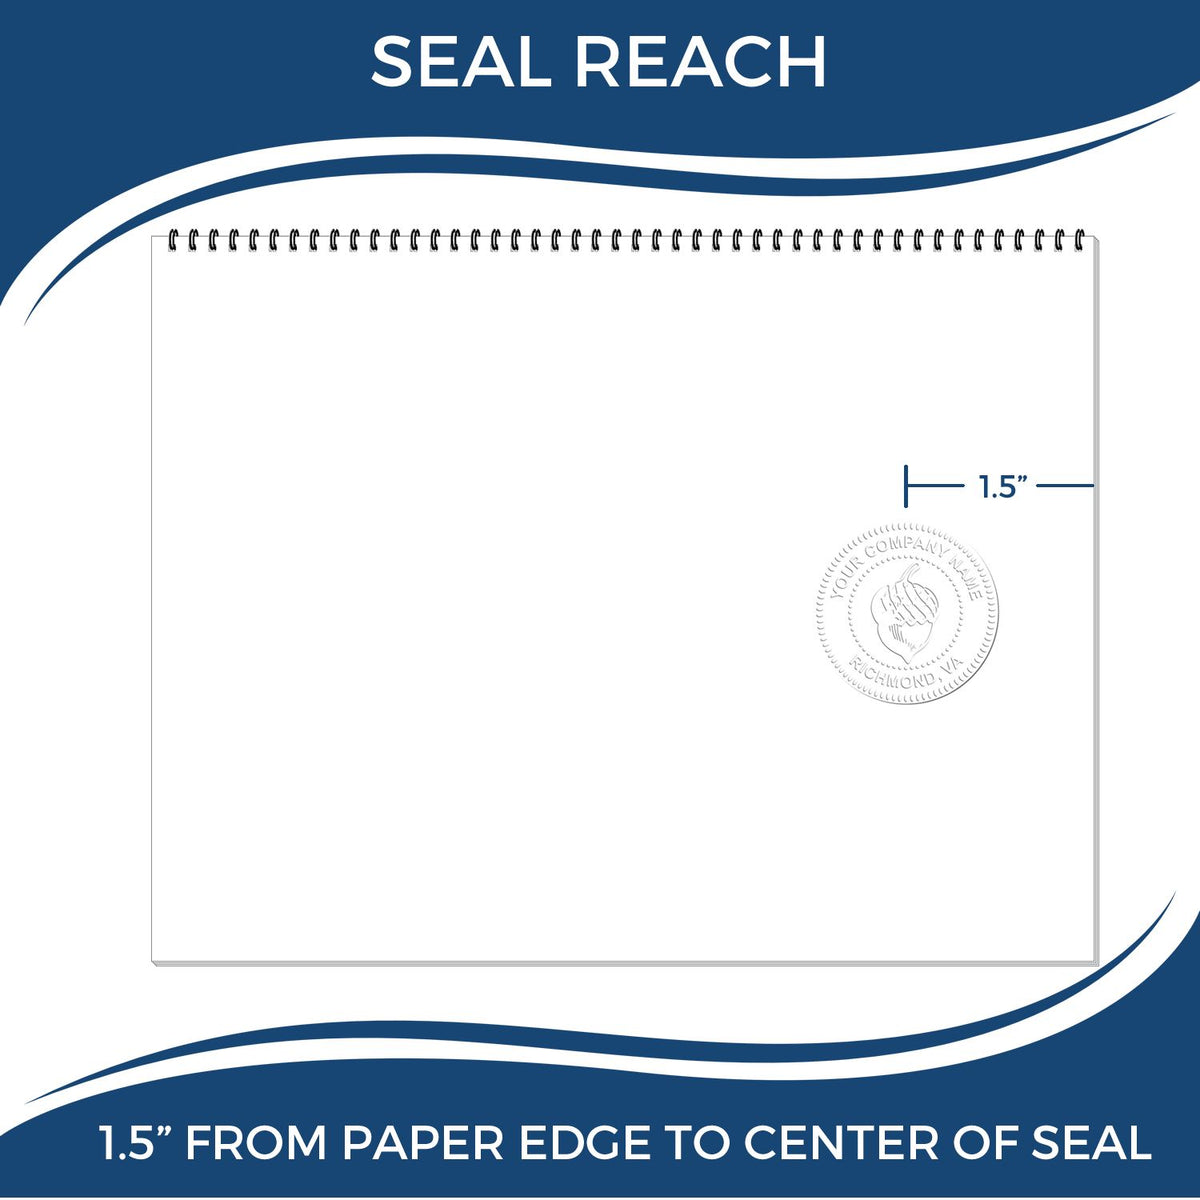 An infographic showing the seal reach which is represented by a ruler and a miniature seal image of the Colorado Desk Surveyor Seal Embosser